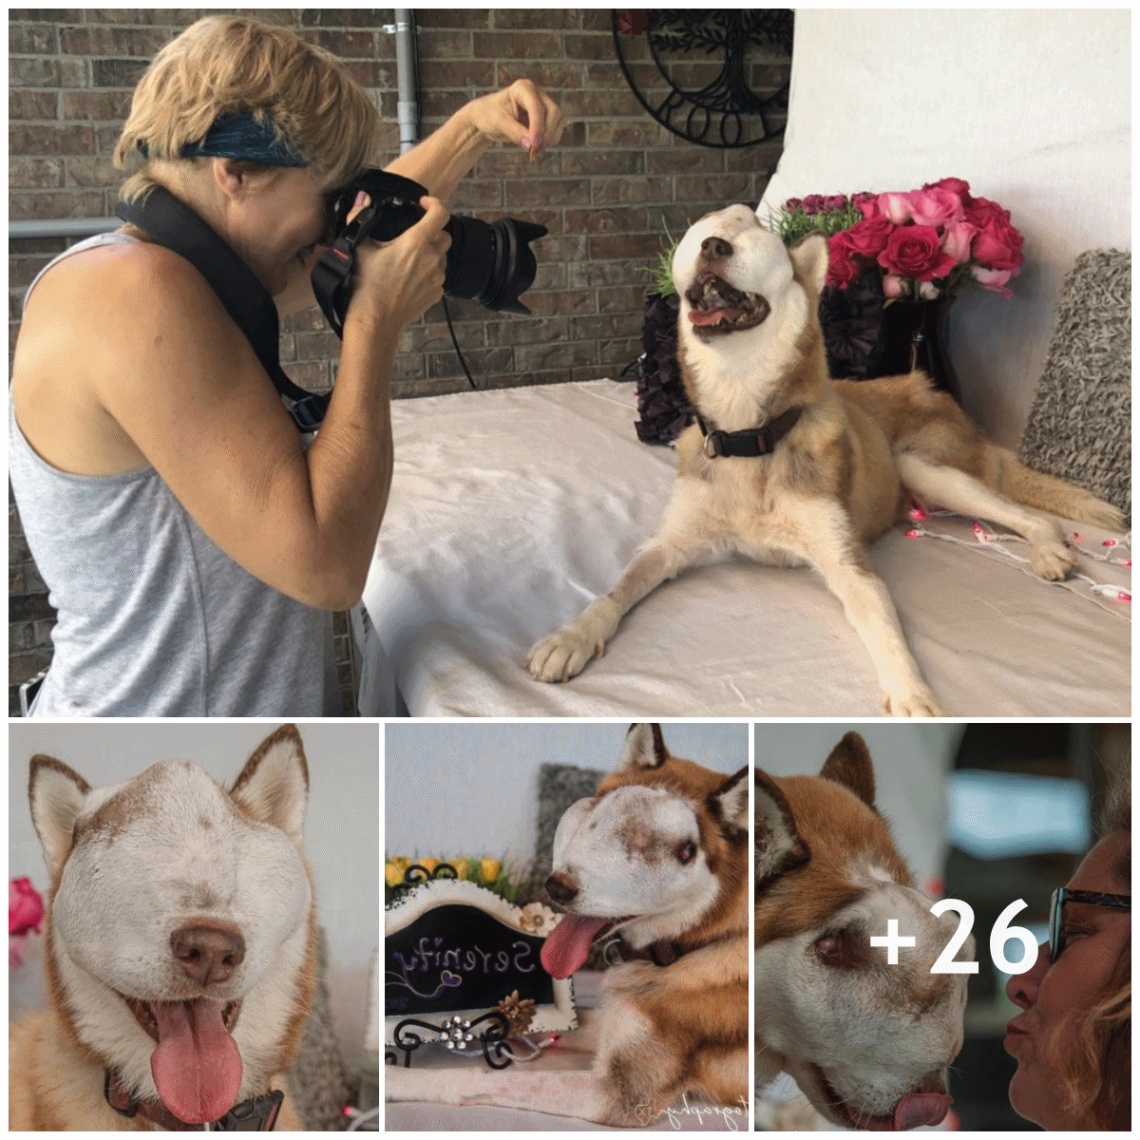 A memorable birthday for a blind furry friend with photos capturing memorable moments that are heartwarming and filled with love.